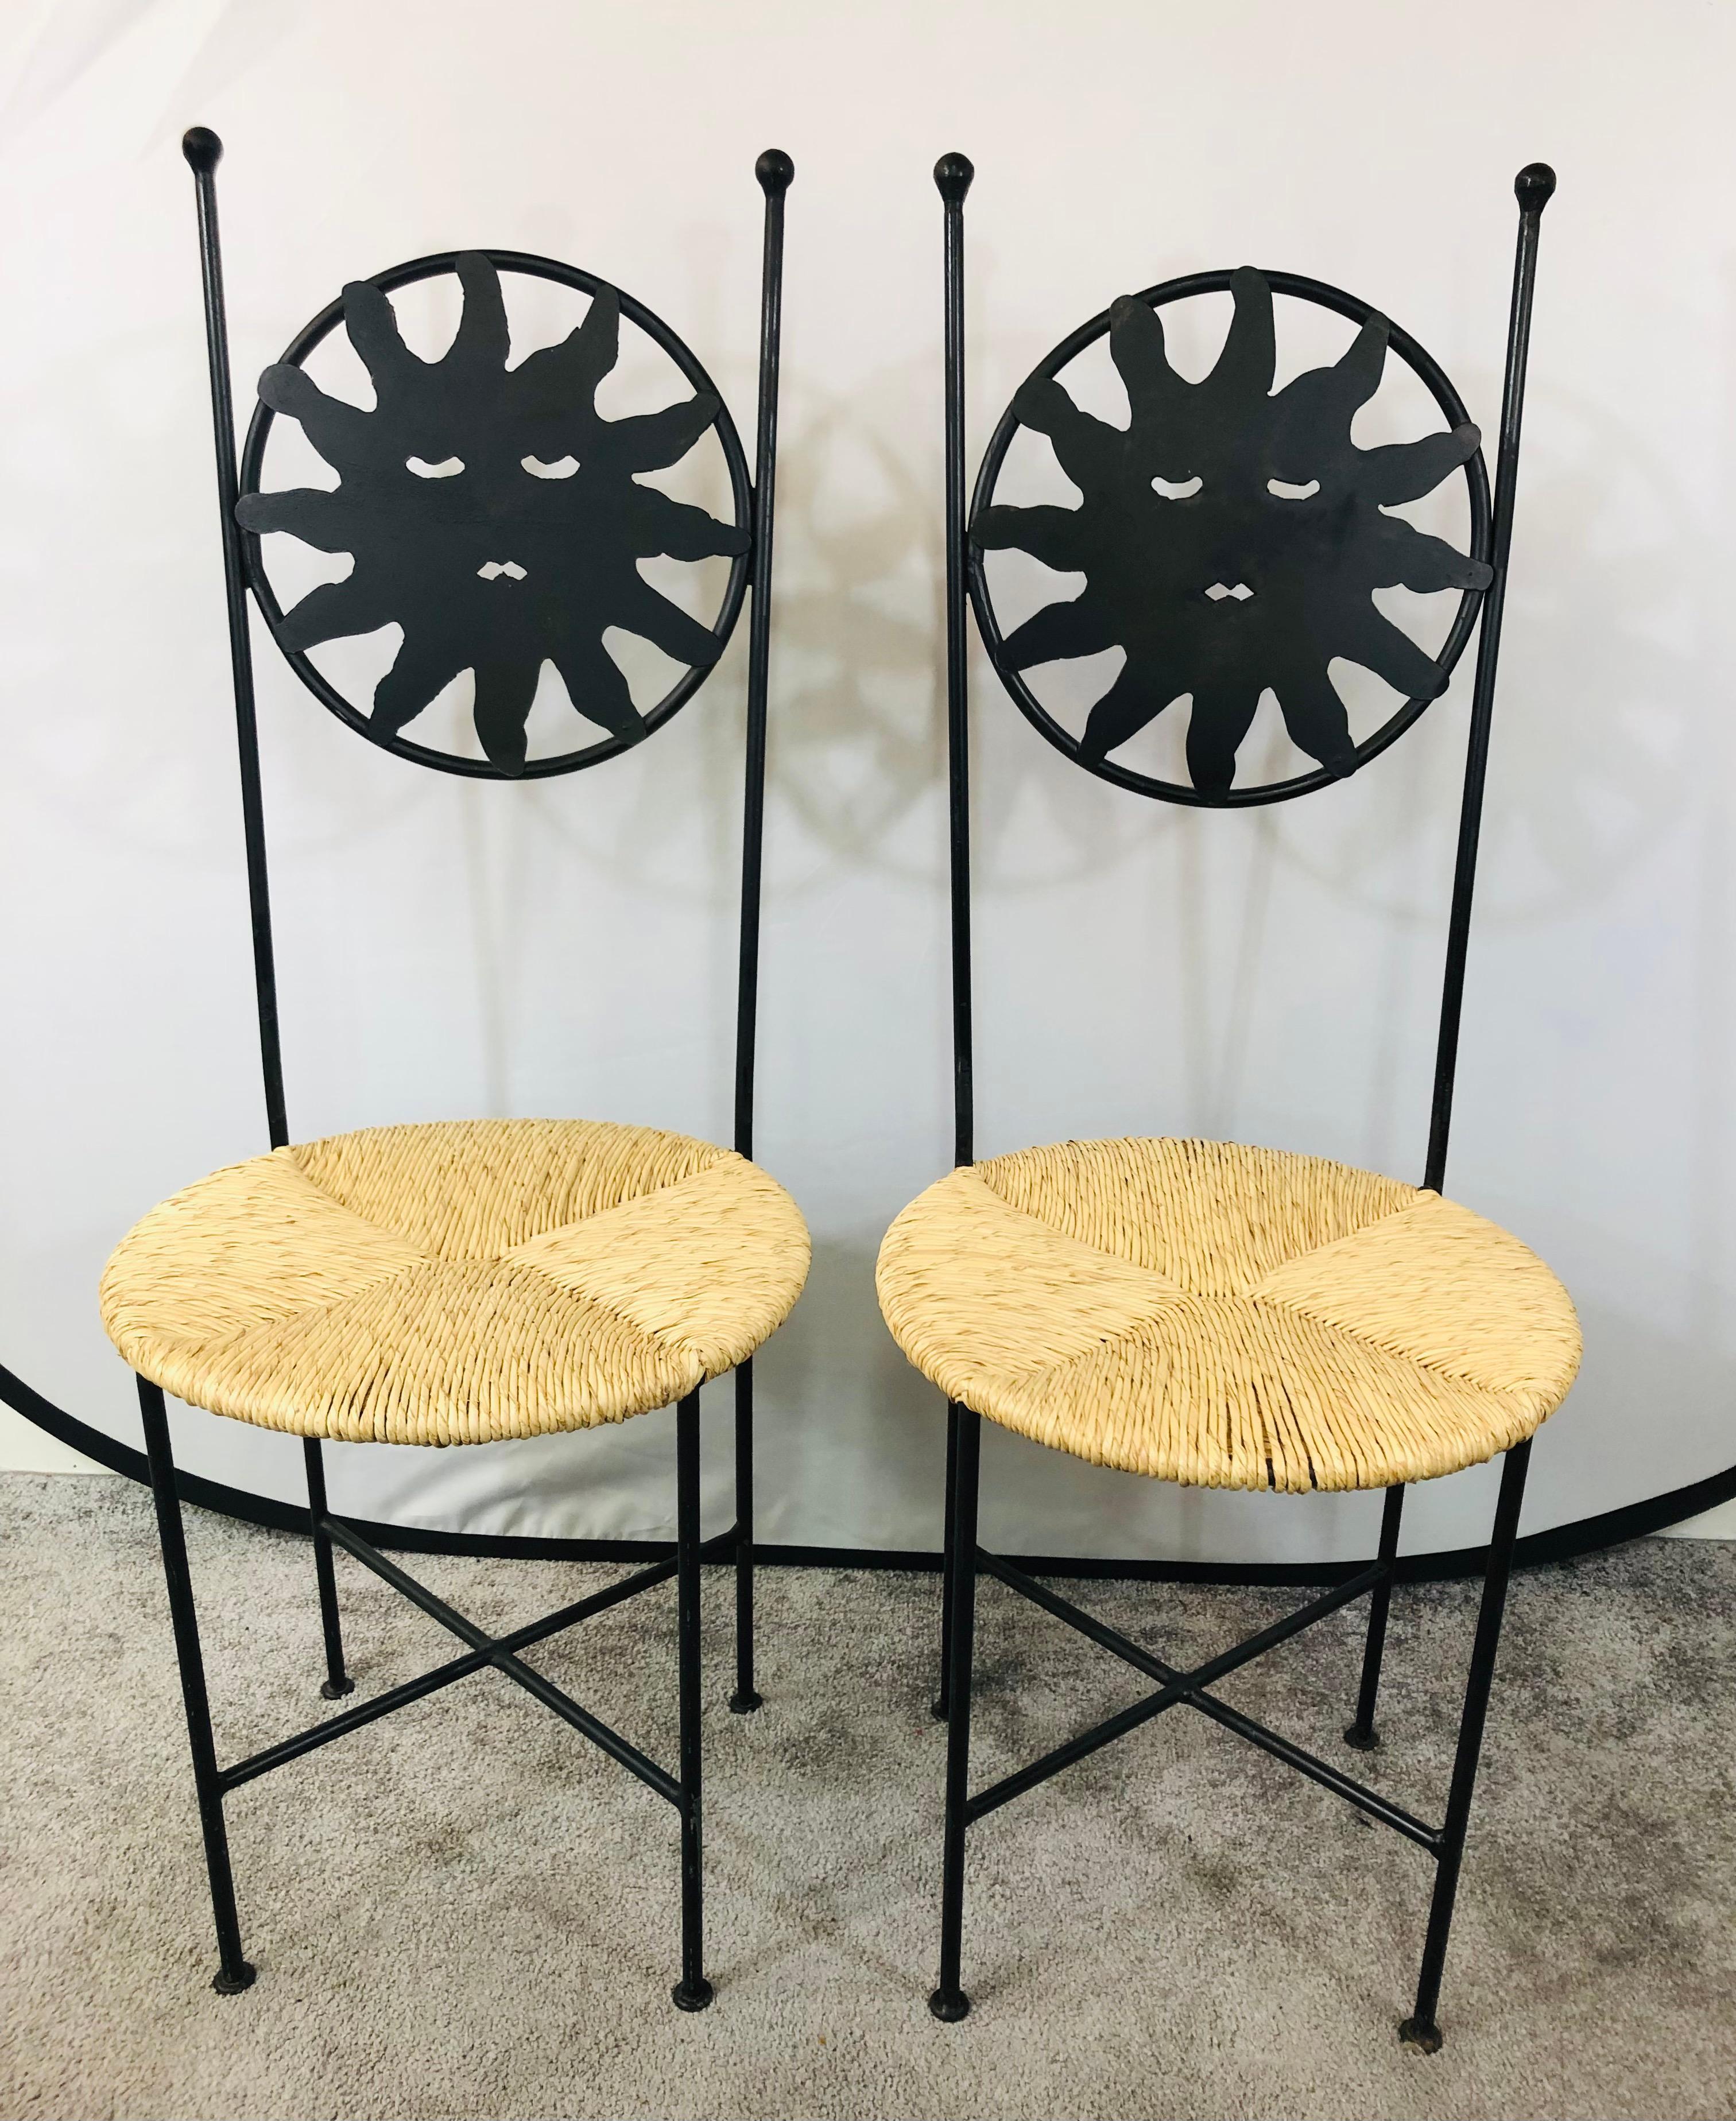 An exquisite set of four Art Deco wrought iron indoor or patio chairs. the circular shaped back of two chairs is carved to represent the sun and the other two the moon. Very slick and elegant, the chairs seat is made of Ratan which has been